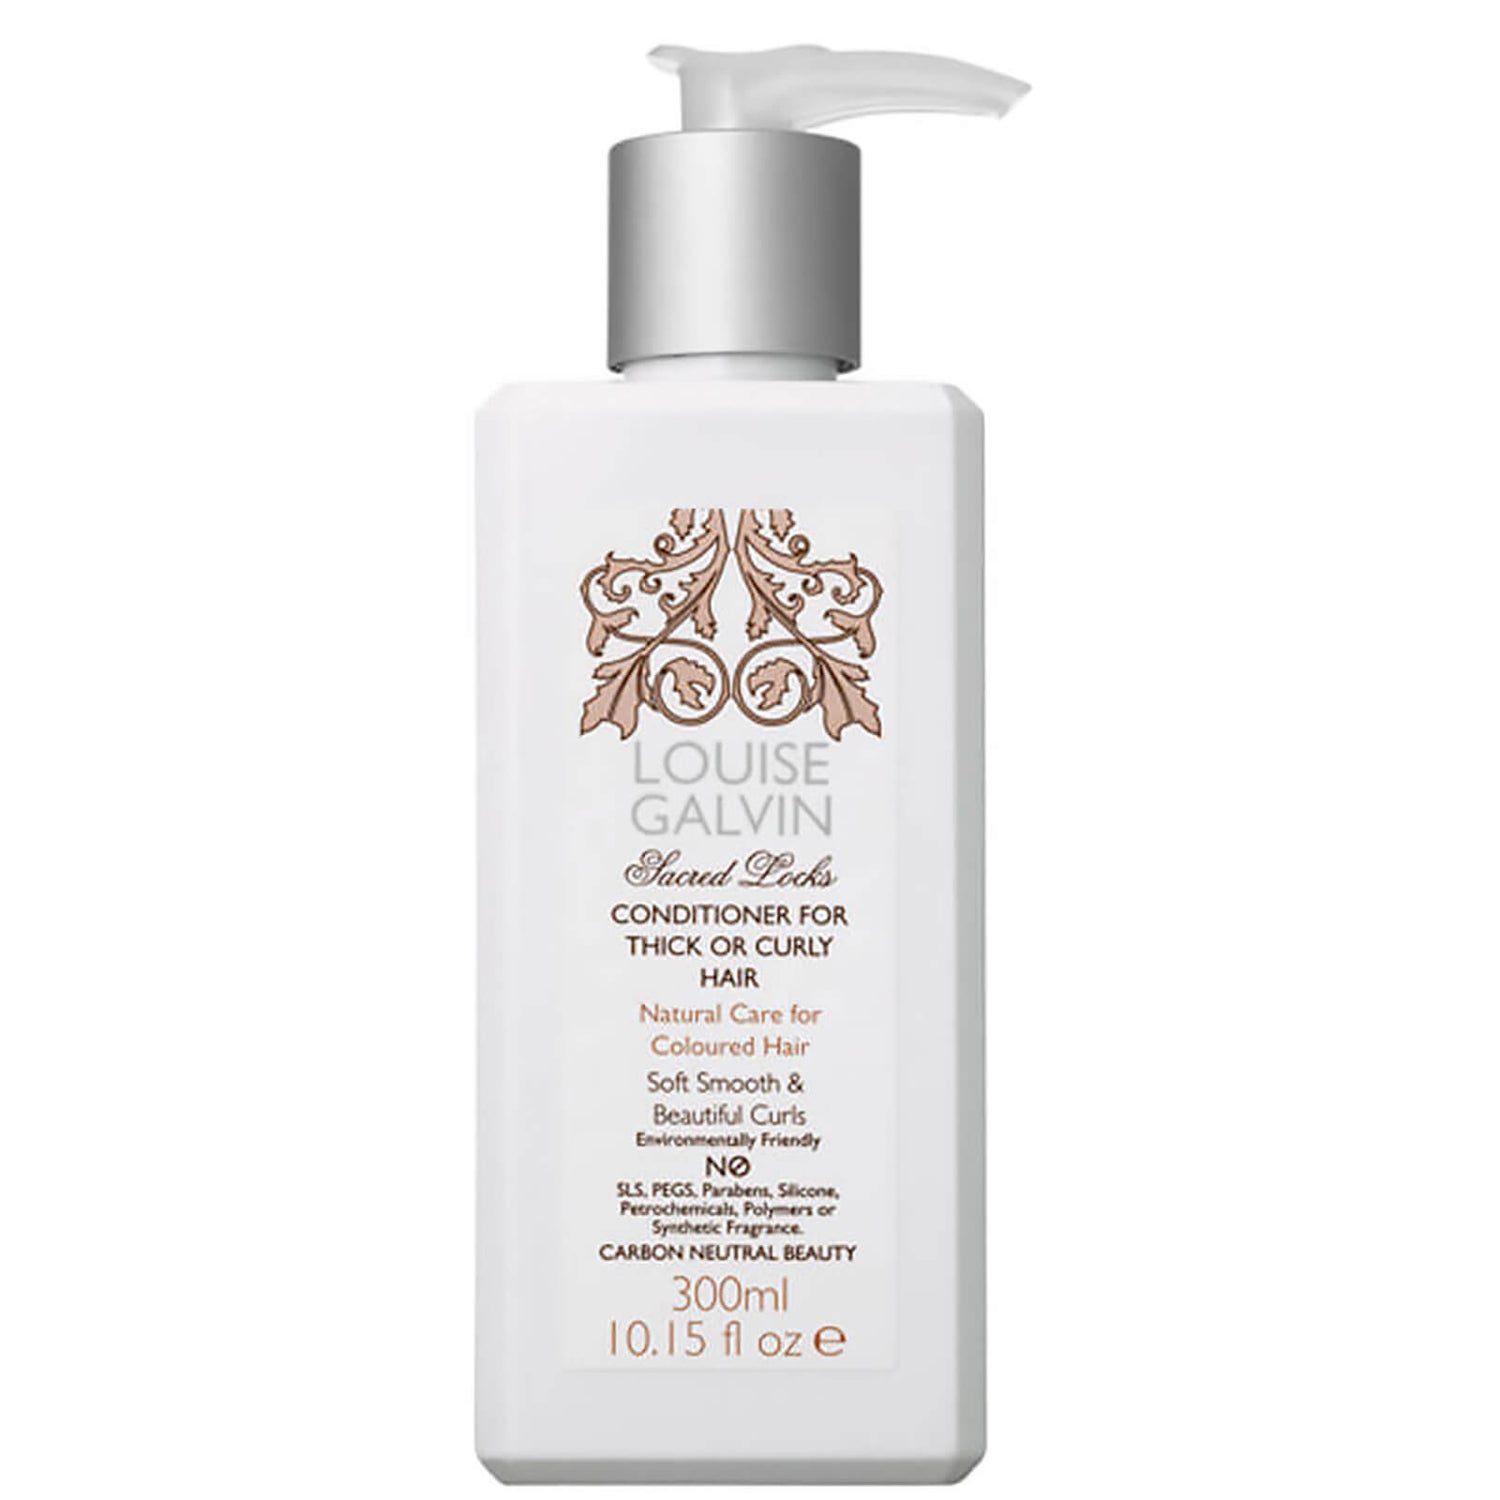 Louise Galvin Conditioner for Thick or Curly Hair -hoitoaine 300ml